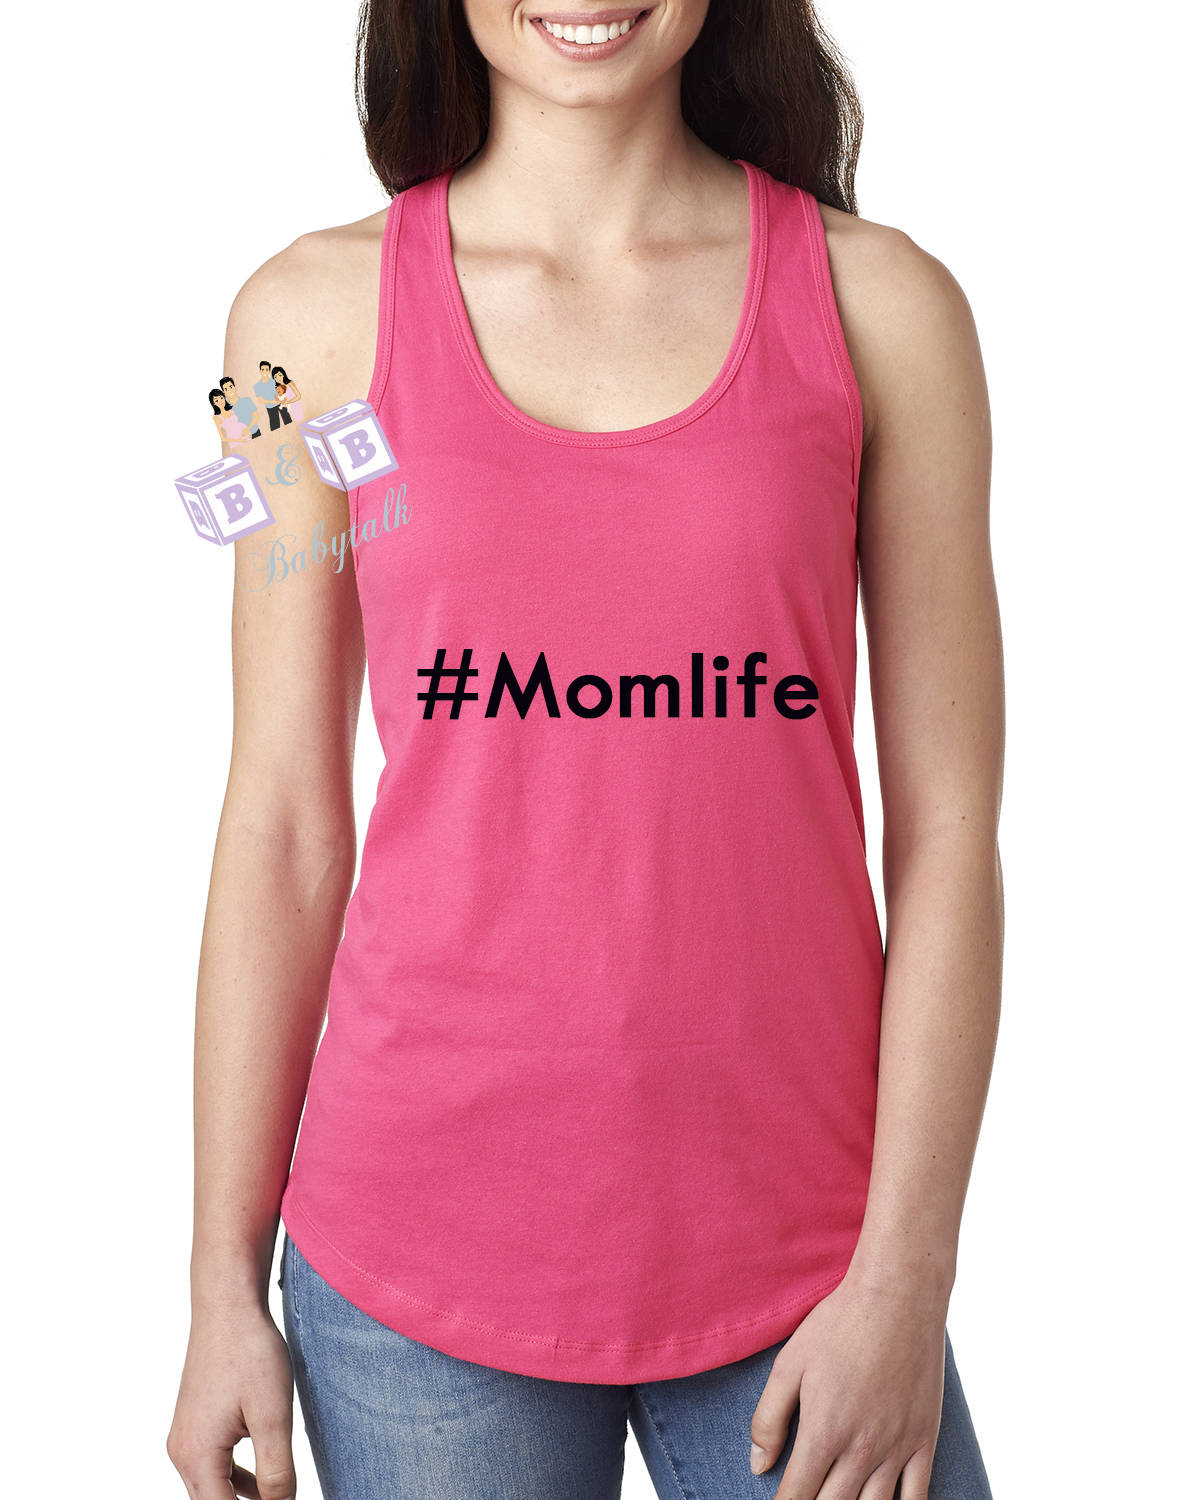 Momlife Shirt, #Momlife, #momlife shirt, Pink shirt, Mom shirt, Mom Life is the Best Life, Hashtag Mom Life; Mom Life, Gift For Mom